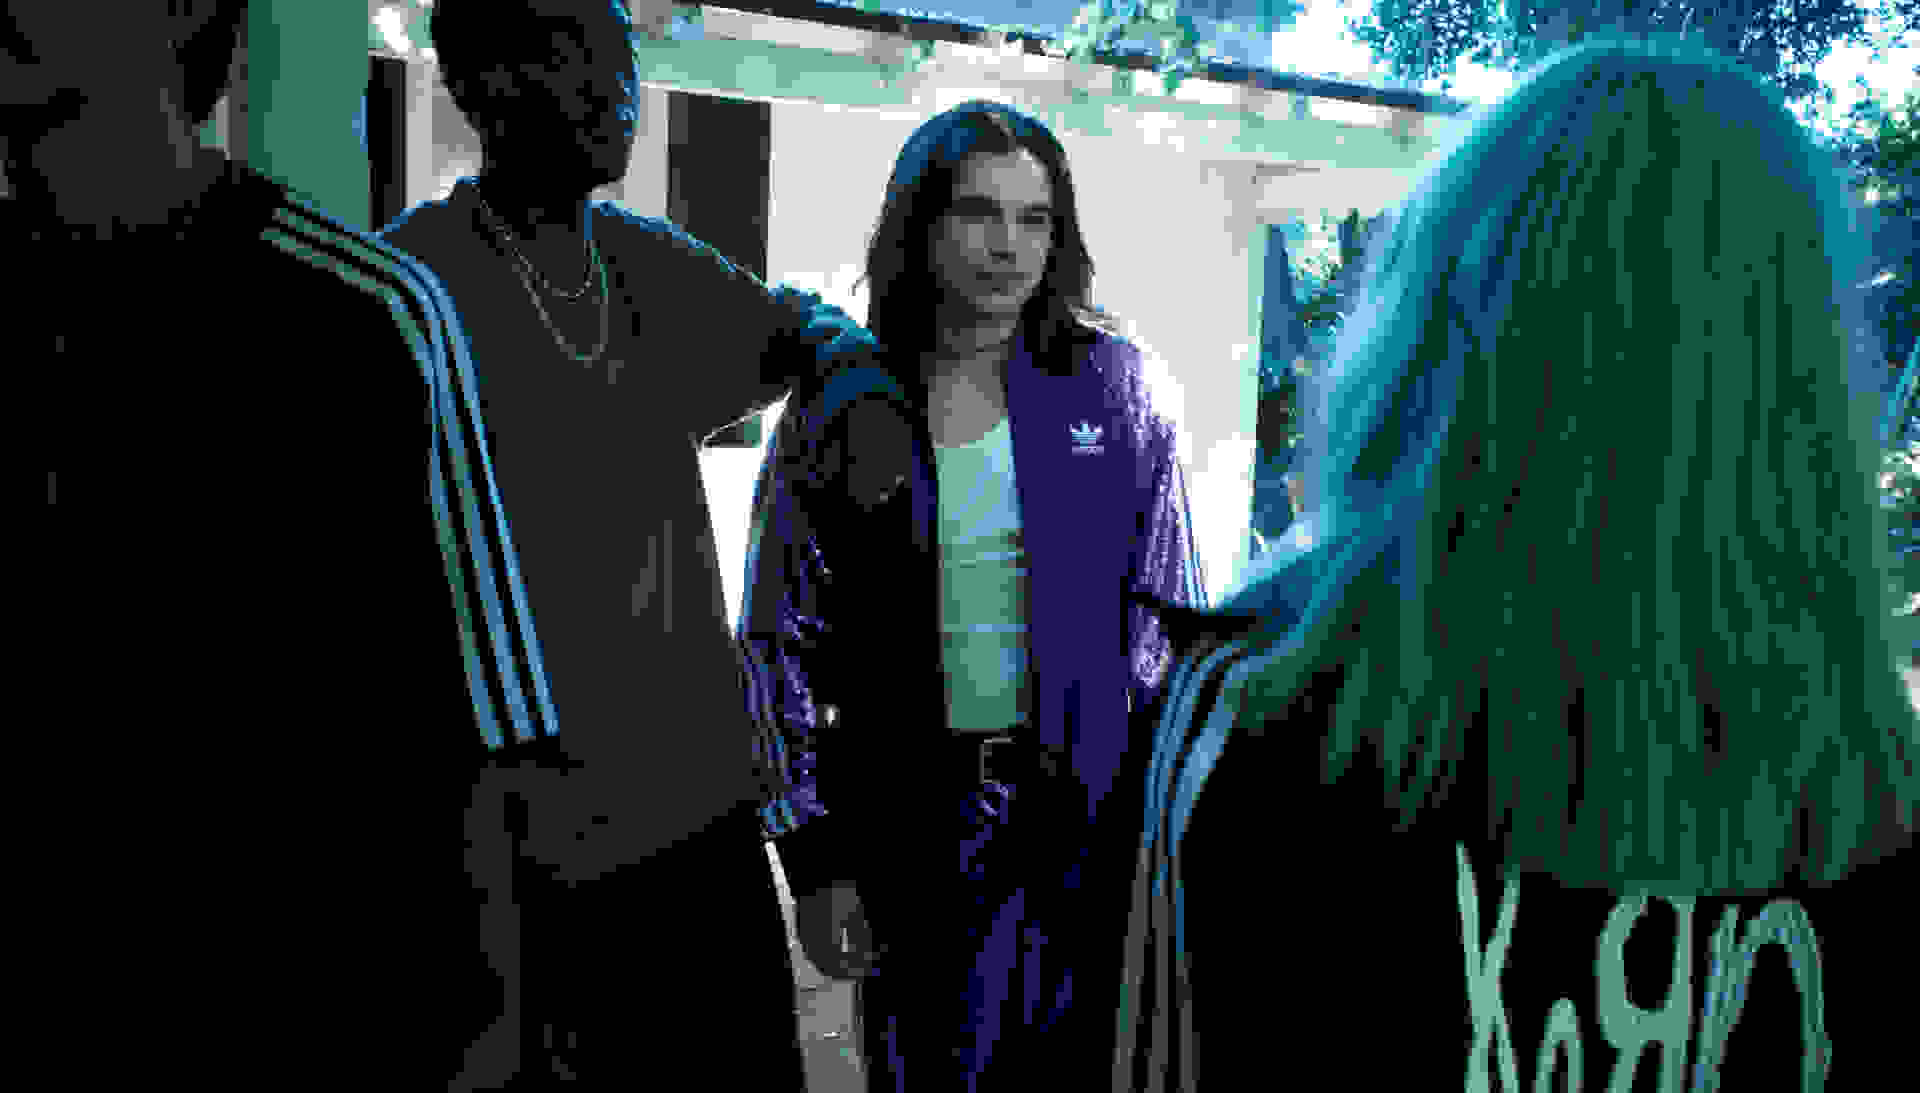 A group of young people wearing the adidas Originals x KoRn collection stand in the shade in front of a house with white walls.